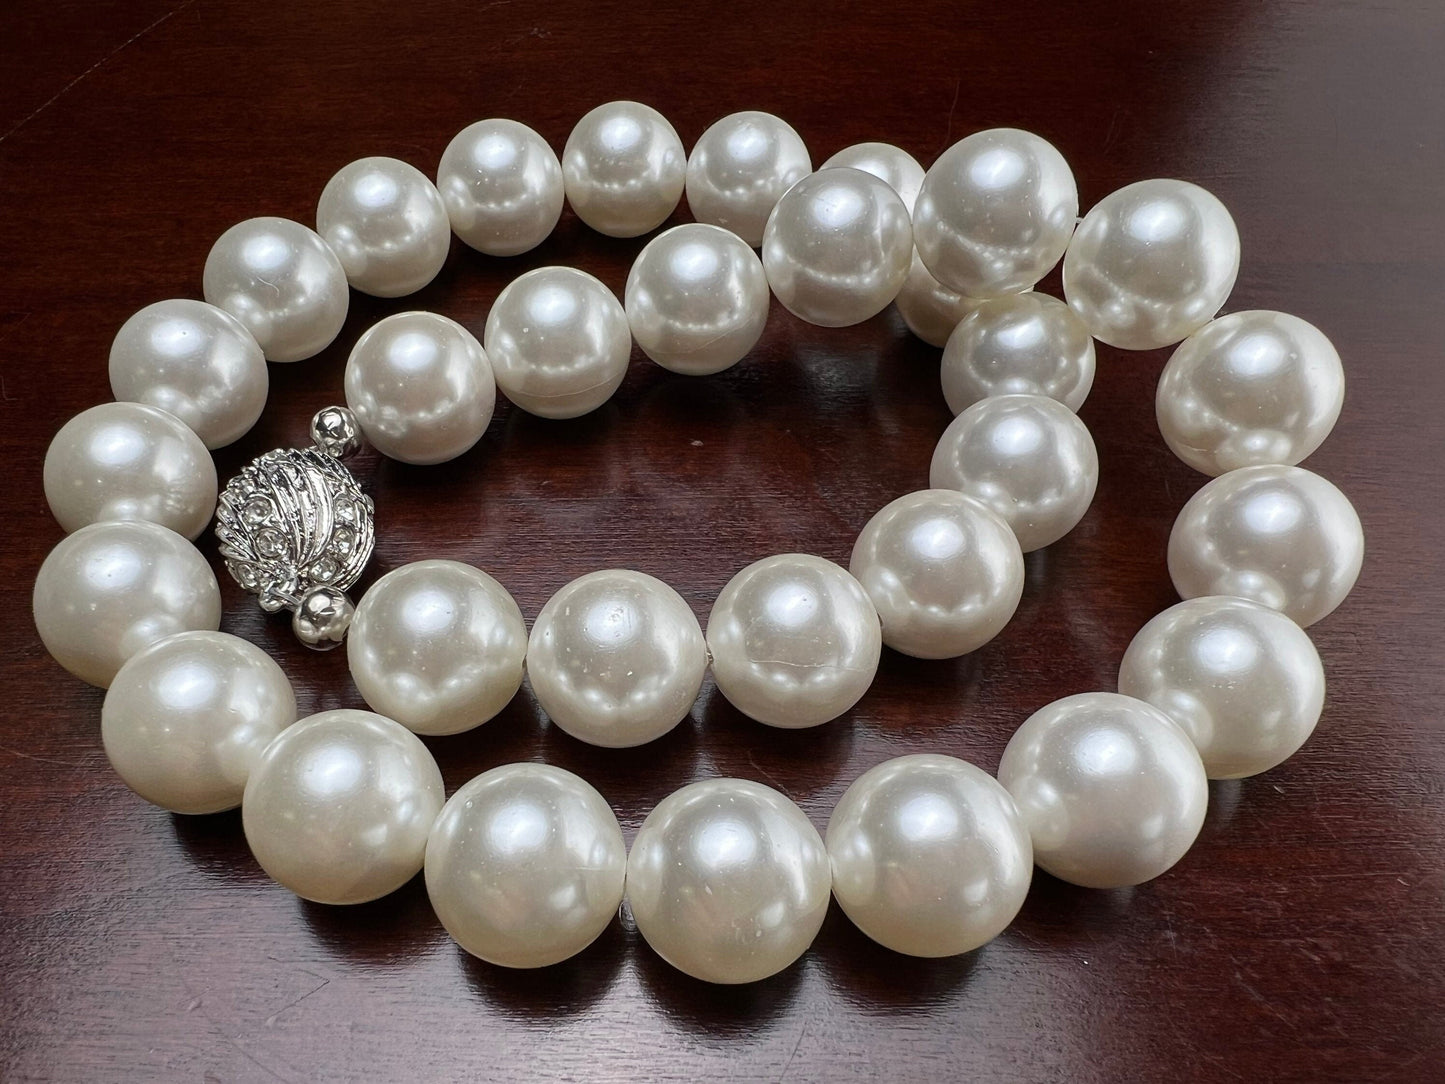 14mm large White South Seashell Pearl Round Statement Necklace with Strong CZ Magnetic Clasp, elegant Bridesmaids wedding evening wear gift